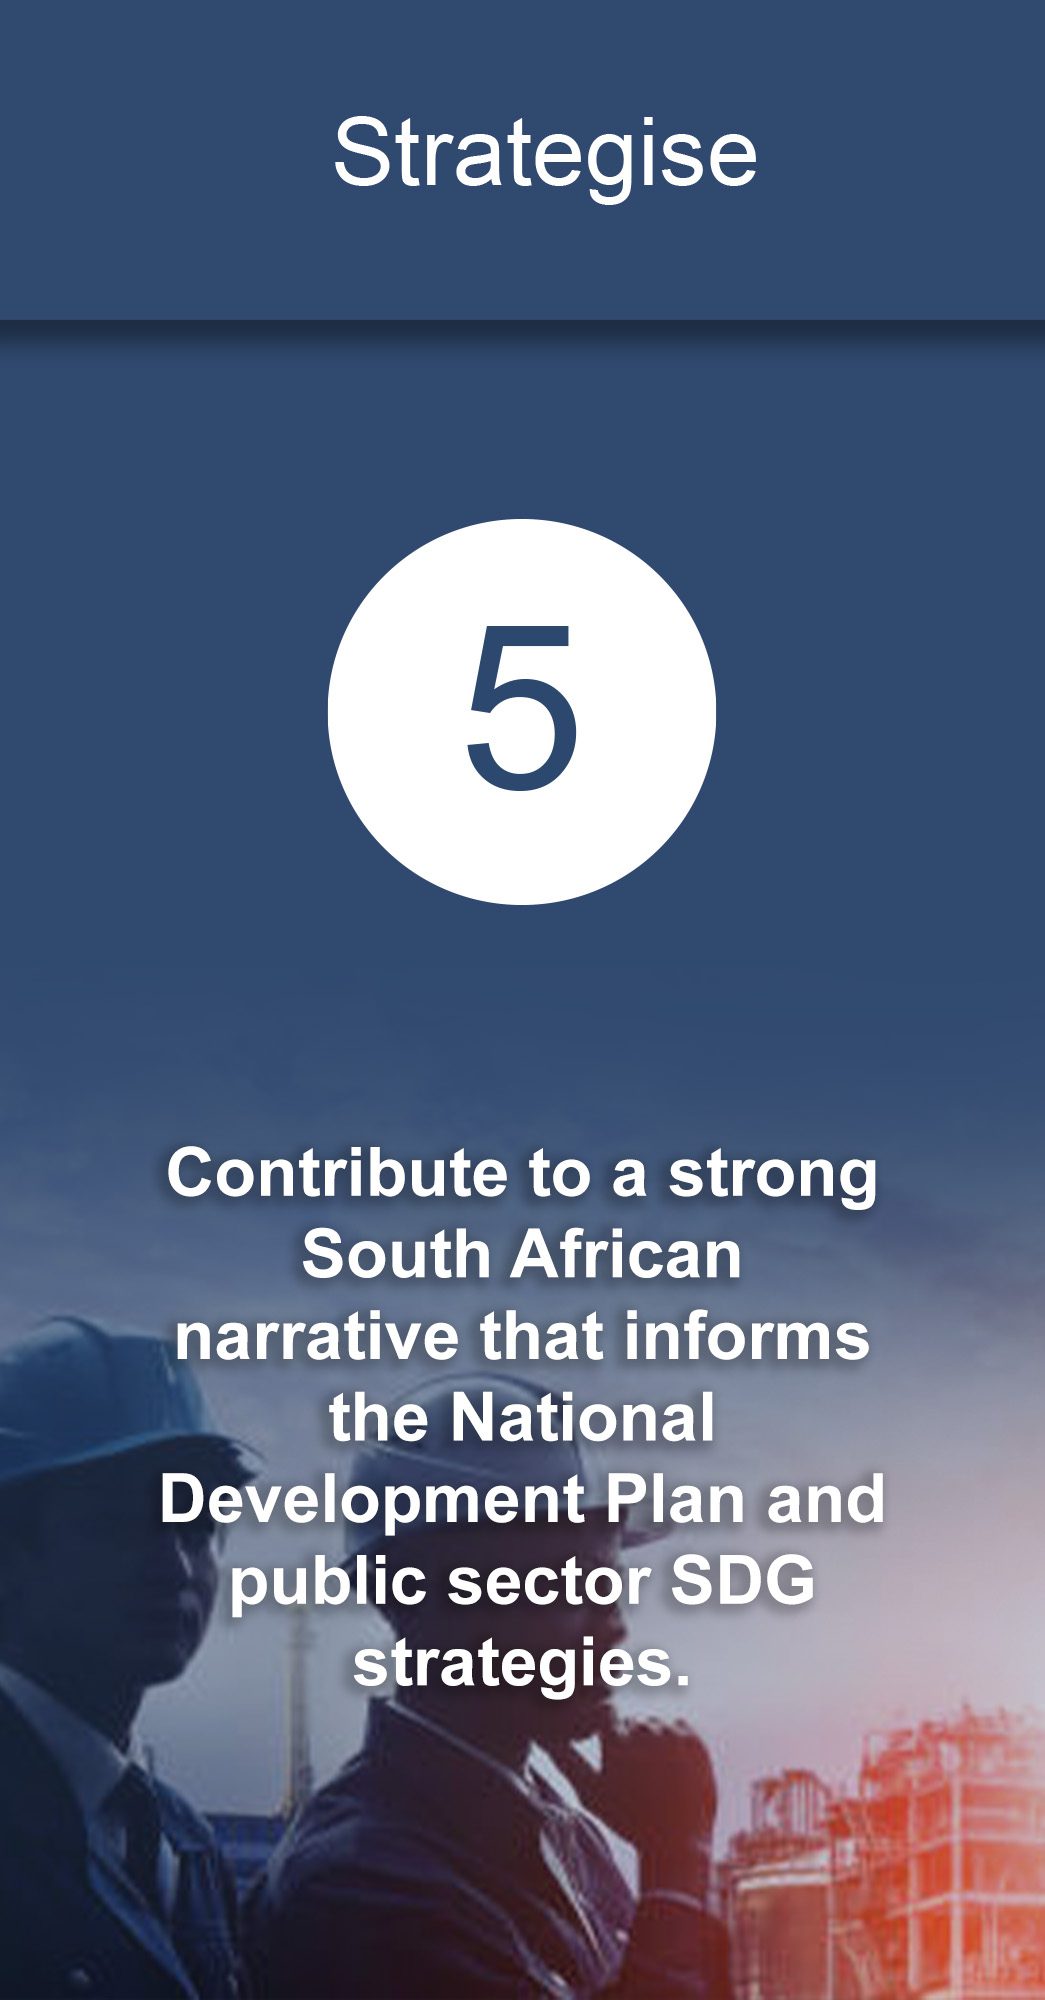 Contribute to a strong South African narrative that informs the National Development Plan and public sector SDG strategies.